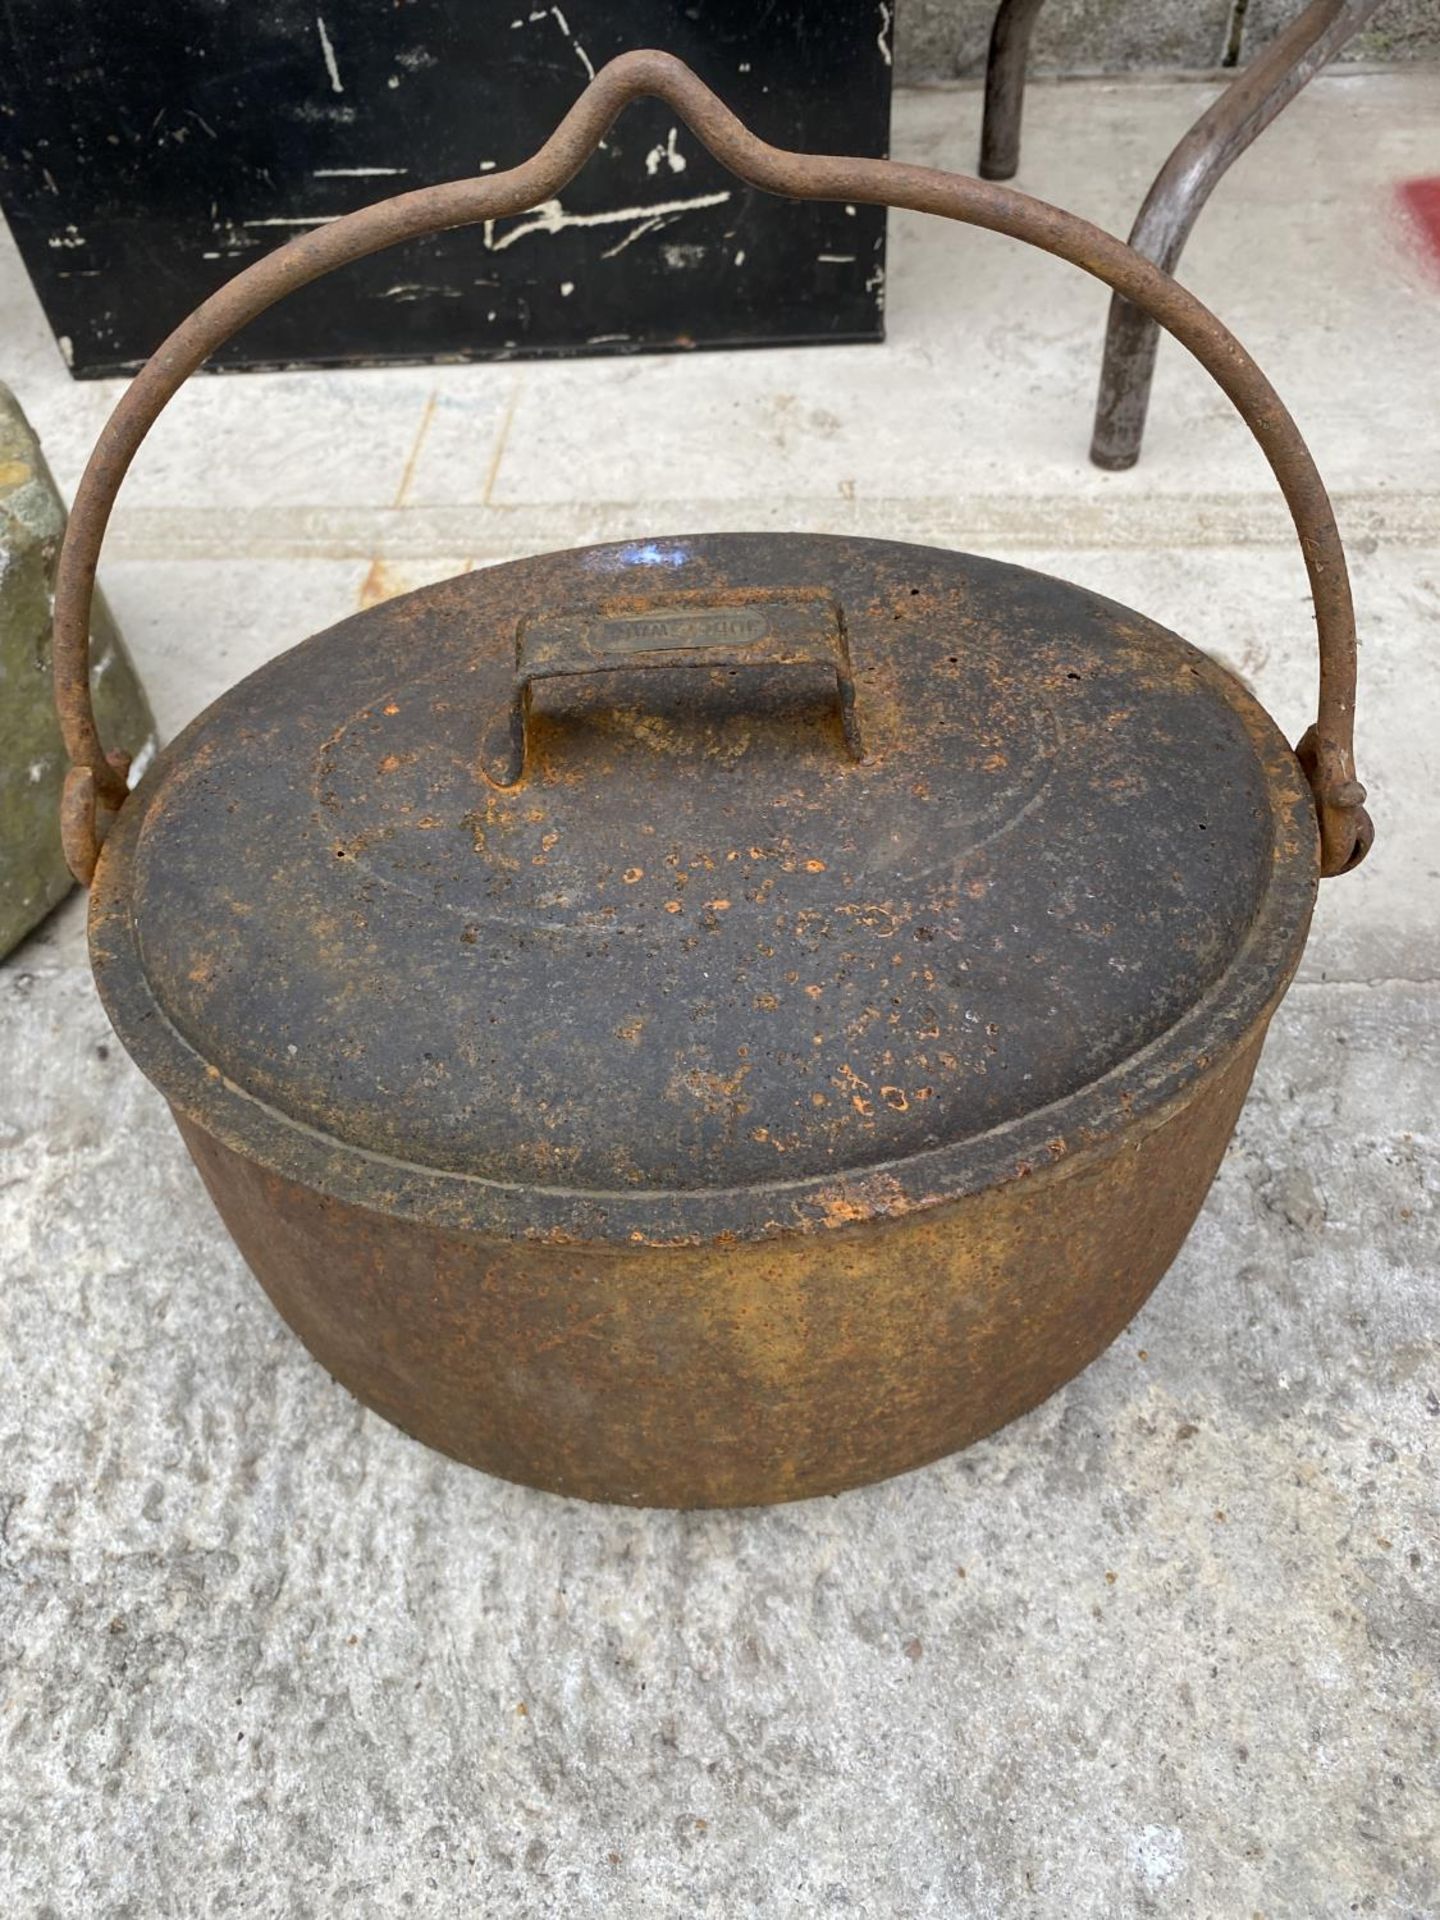 A VINTAGE CAST IRON ROMANY POT BELLY COOKING POT COMPLETE WITH LID - Image 4 of 4